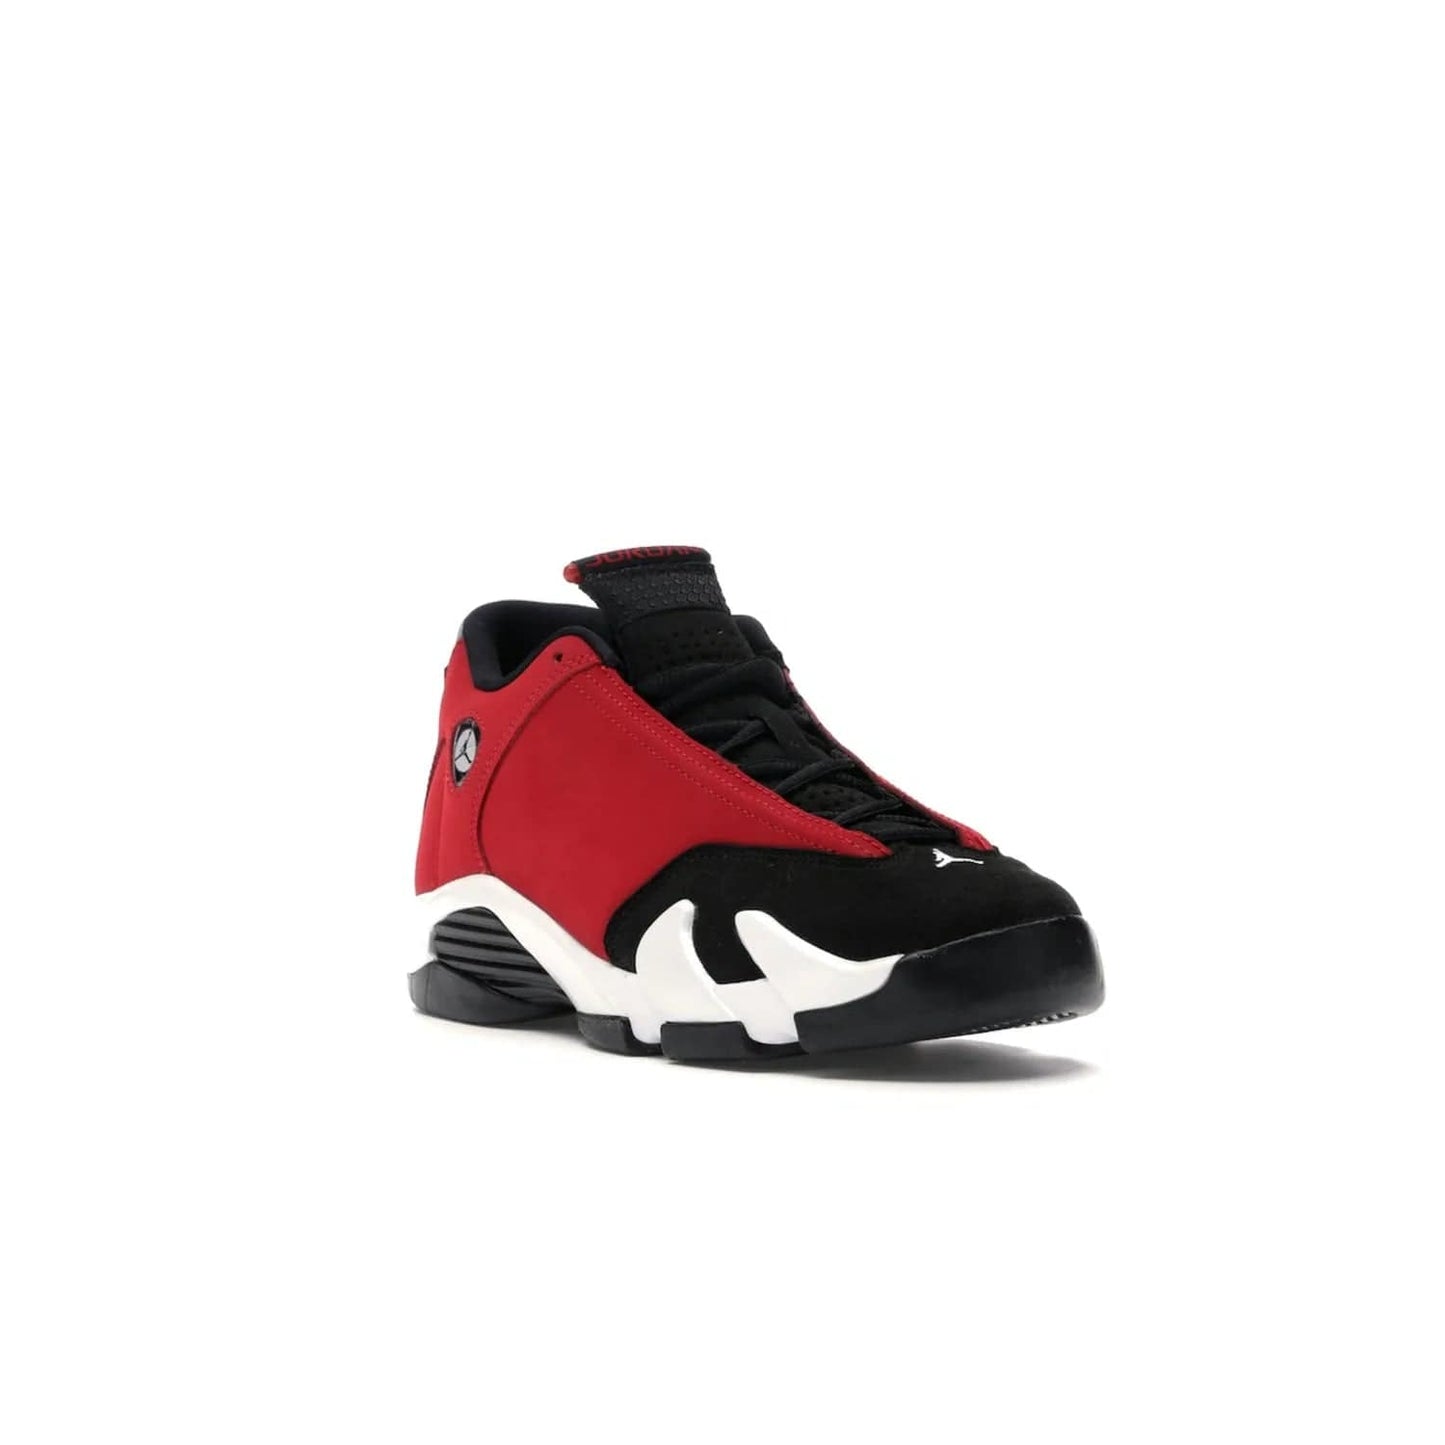 Jordan 14 Retro Gym Red Toro (GS) - Image 6 - Only at www.BallersClubKickz.com - Introducing the Air Jordan 14 Retro Toro GS – perfect for young grade schoolers. Combining black and red suede, Zoom Air cushioning and a Jumpman logo. Get yours on 2 July for $140!